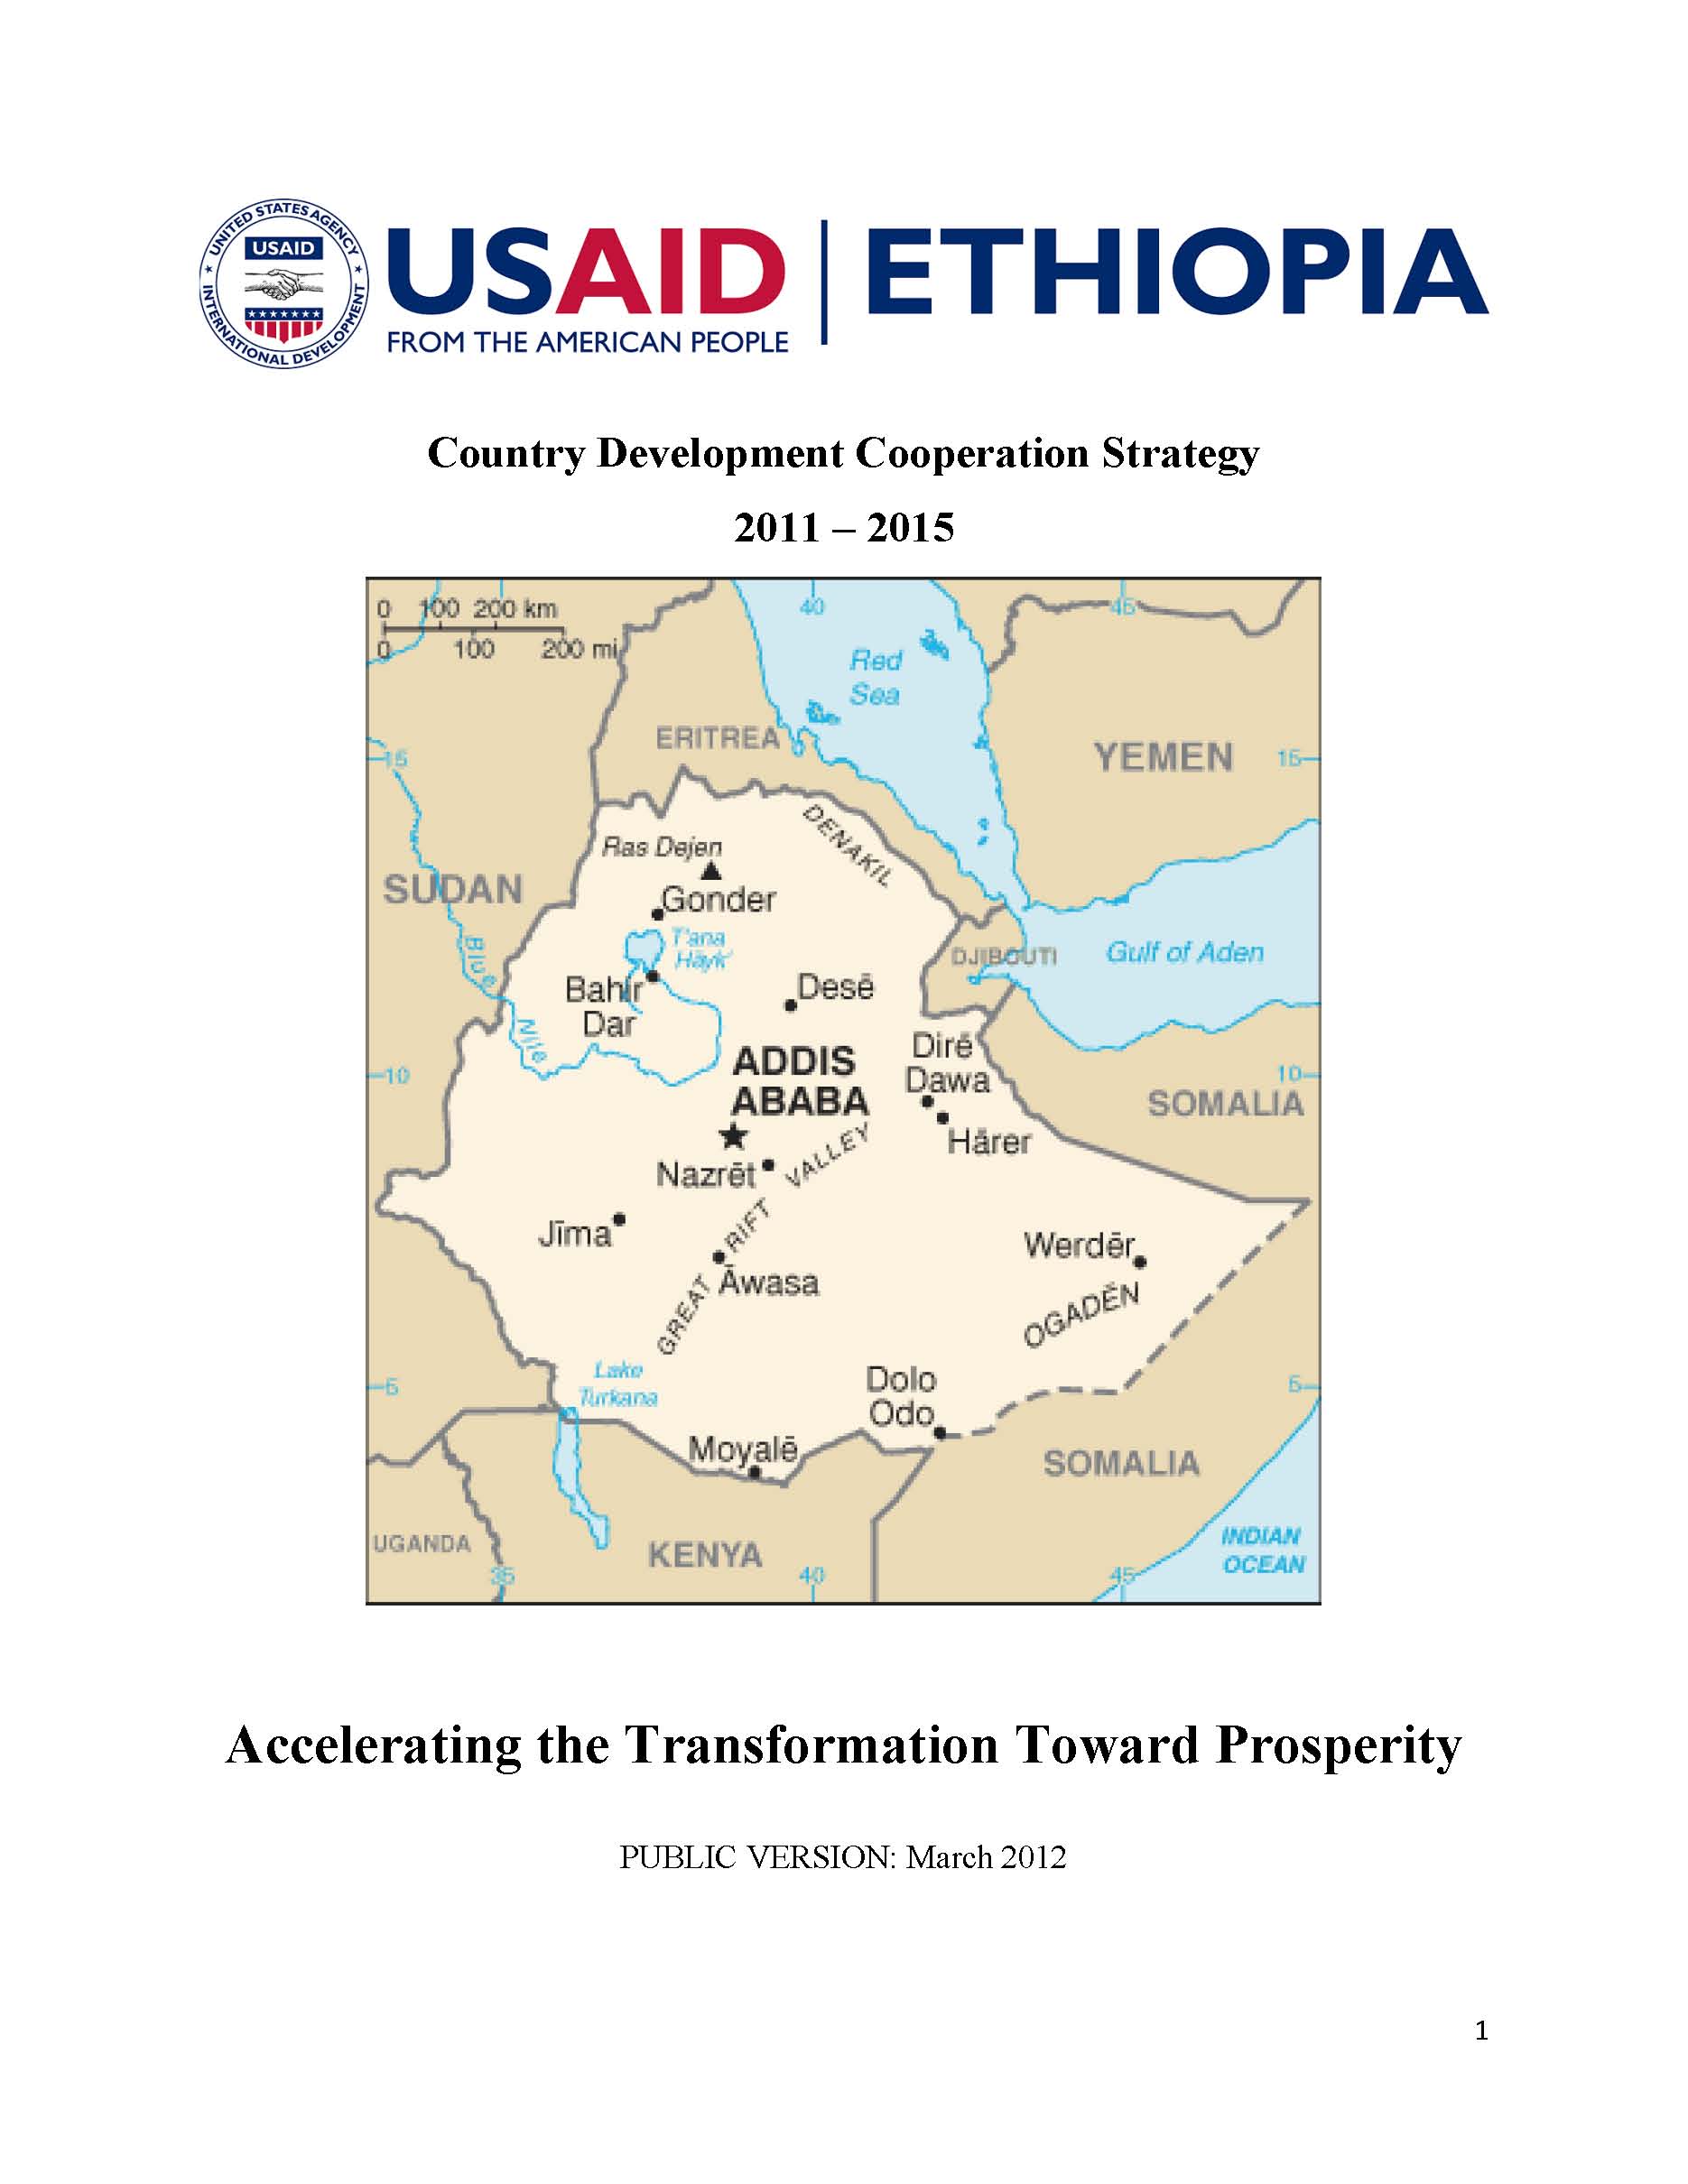 USAID's new five year CDCS builds on the Government of Ethiopia's Growth and Transformation Plan